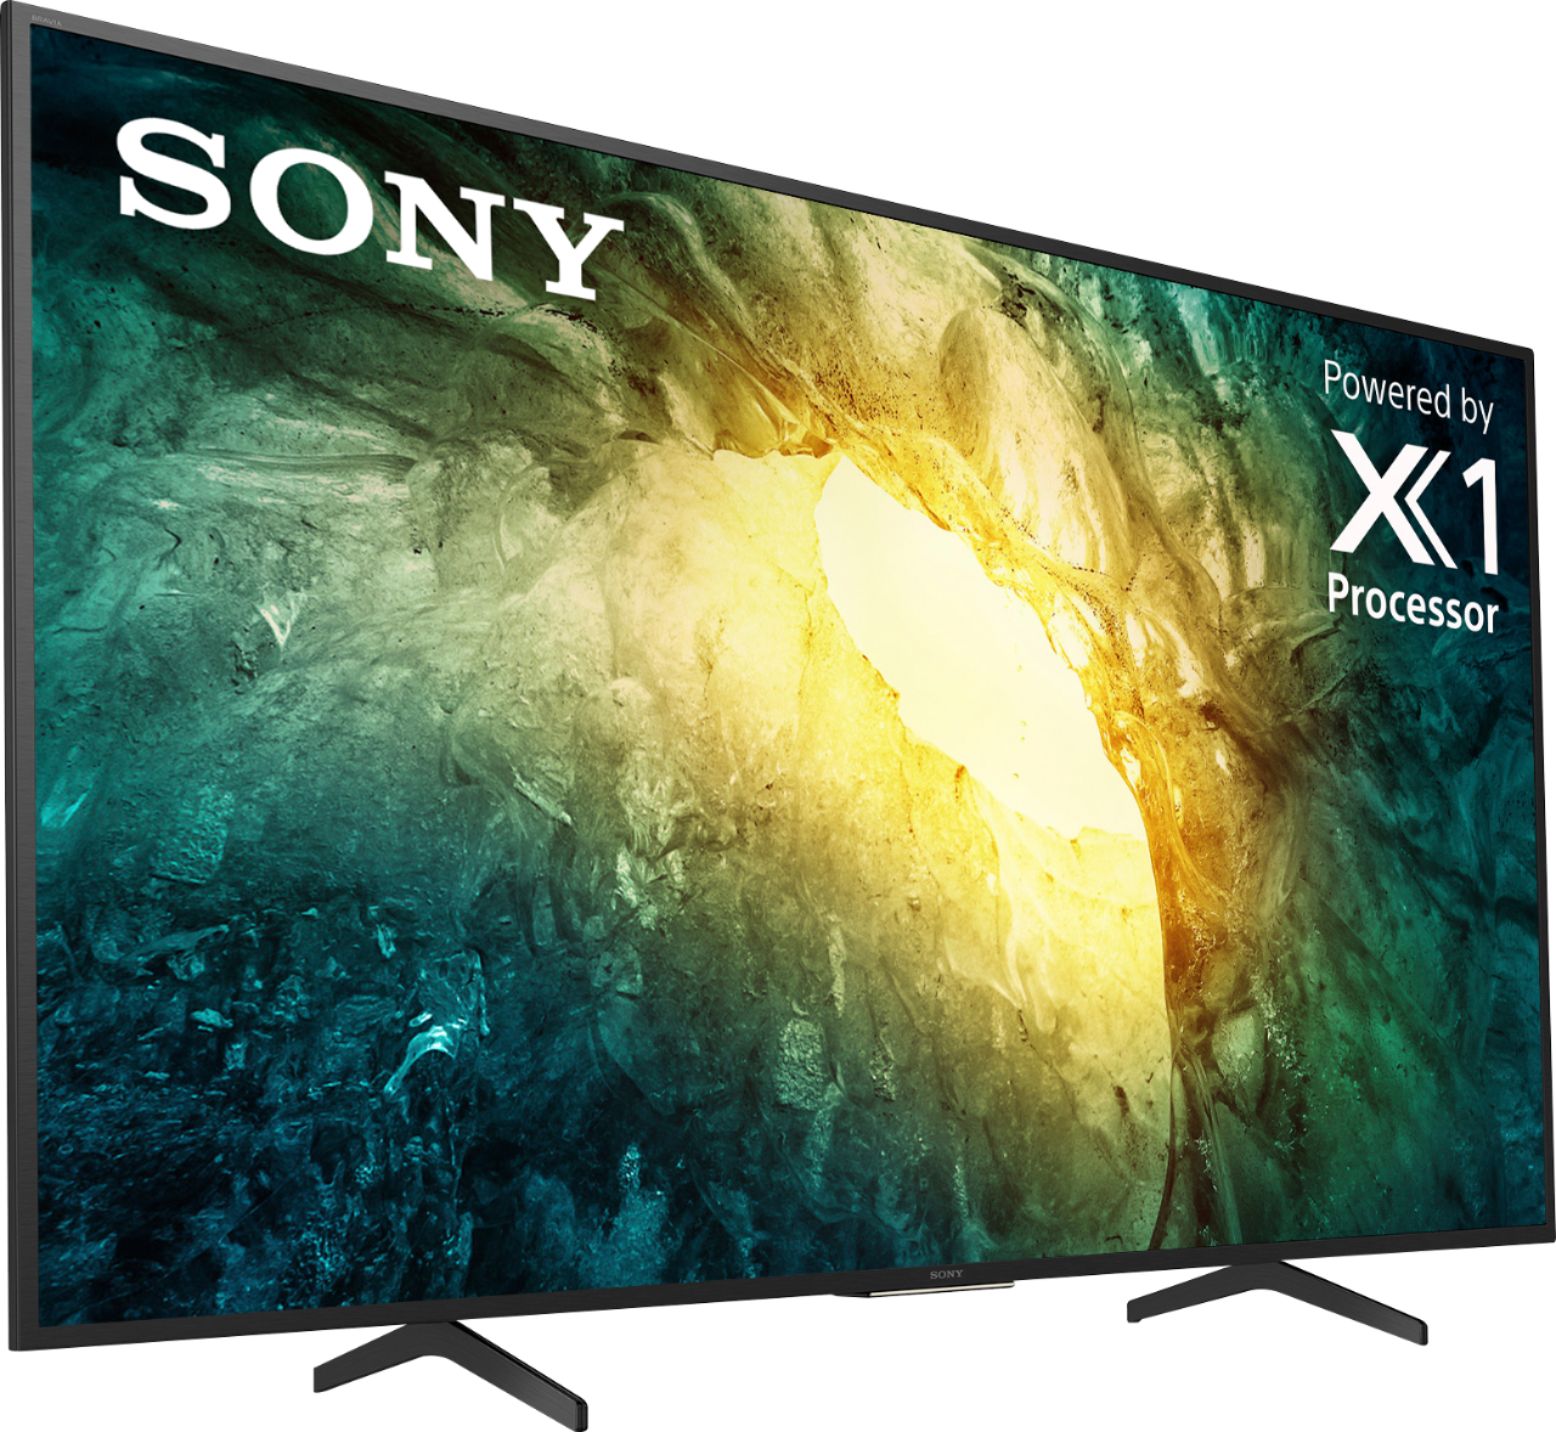 Angle View: Sony - 75" Class X750H Series LED 4K UHD Android TV